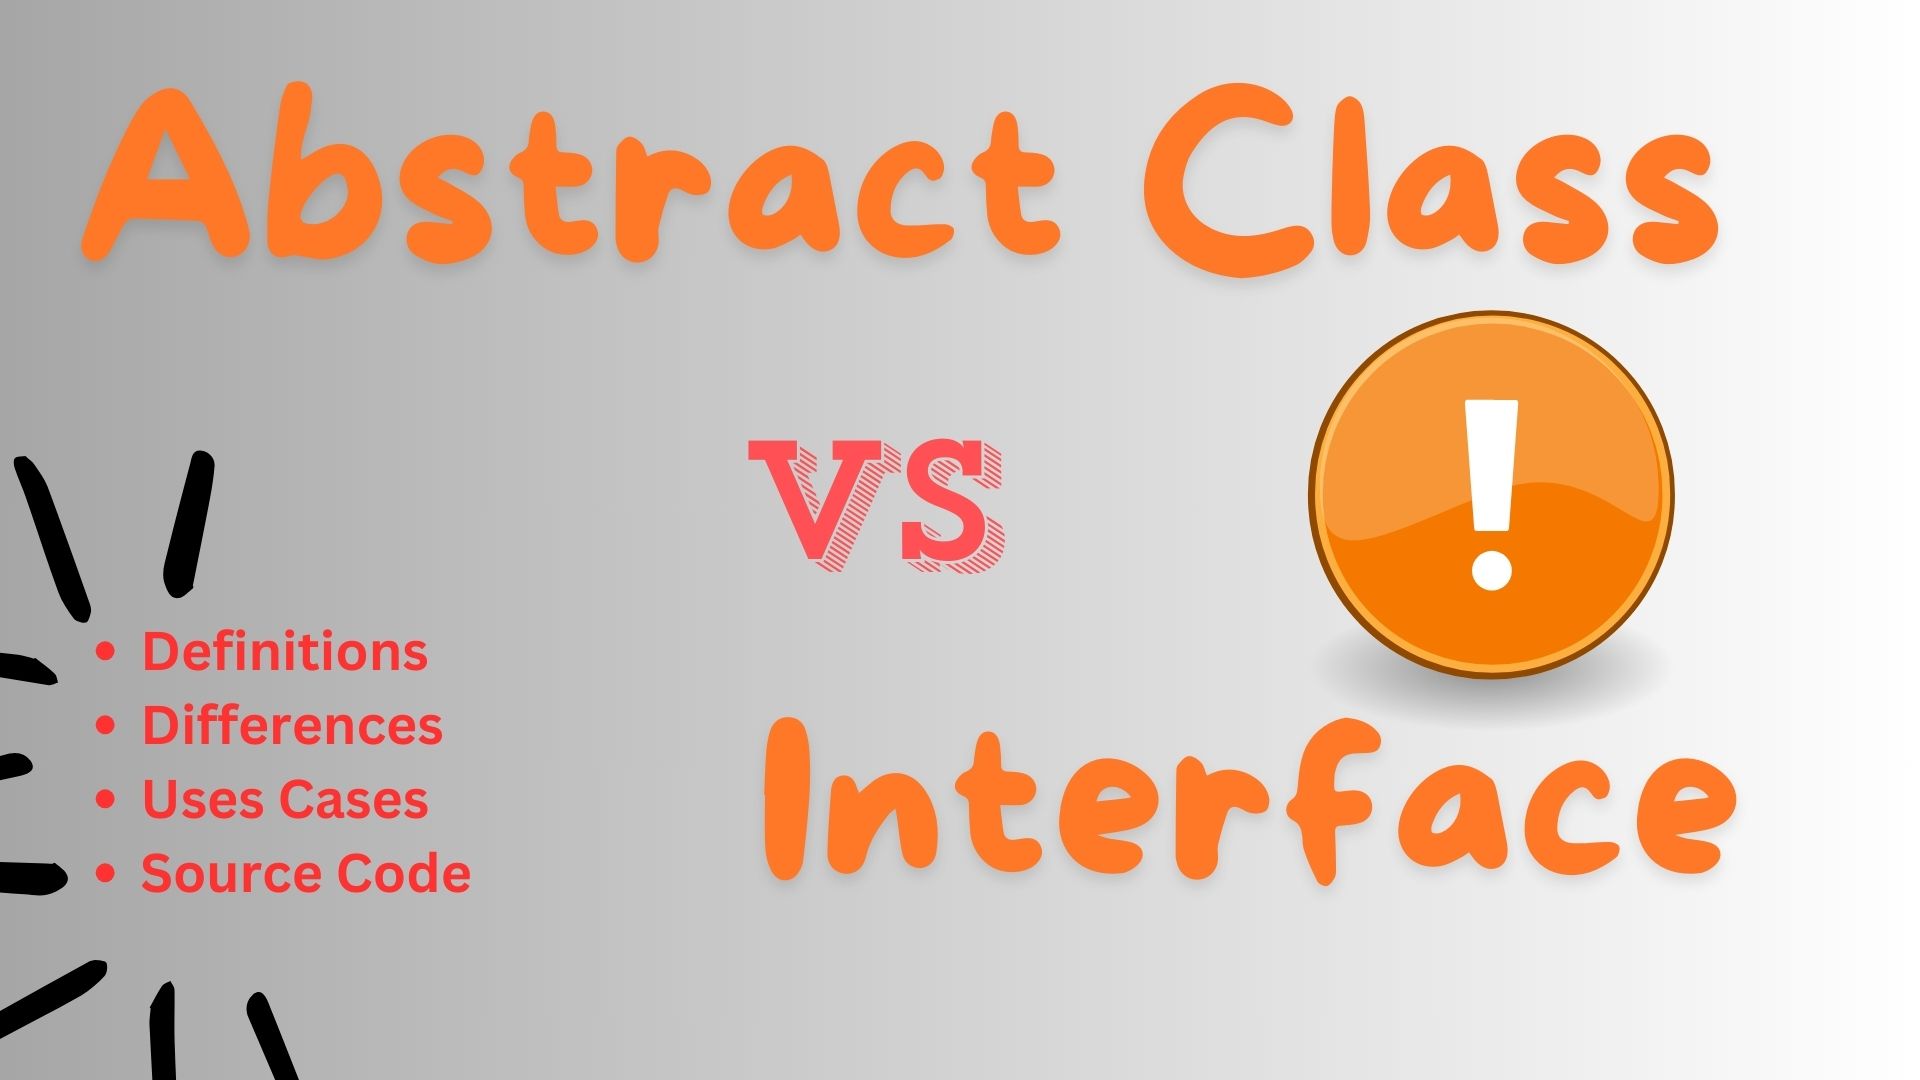 Abstract Class vs Interface